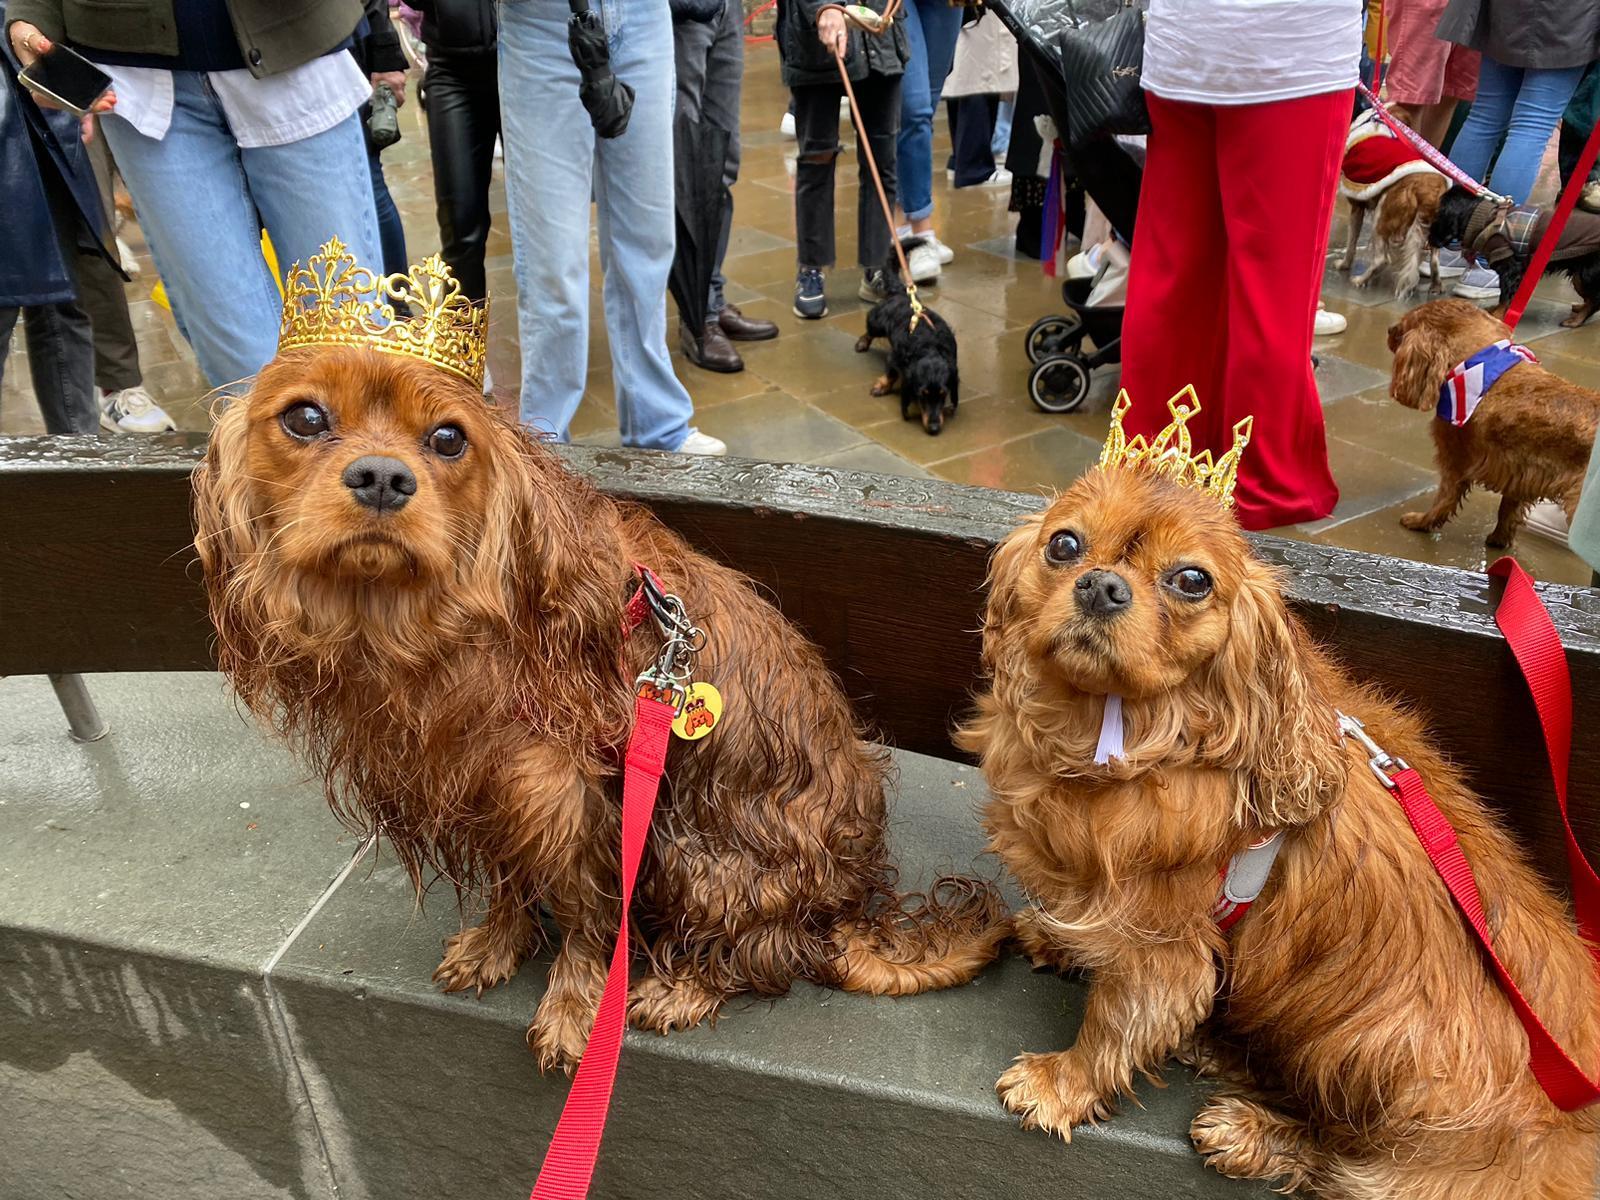 Buddy and Coco, clearly the king and queen of the Cavalier King Charles Spaniels on Coronation Day in London.